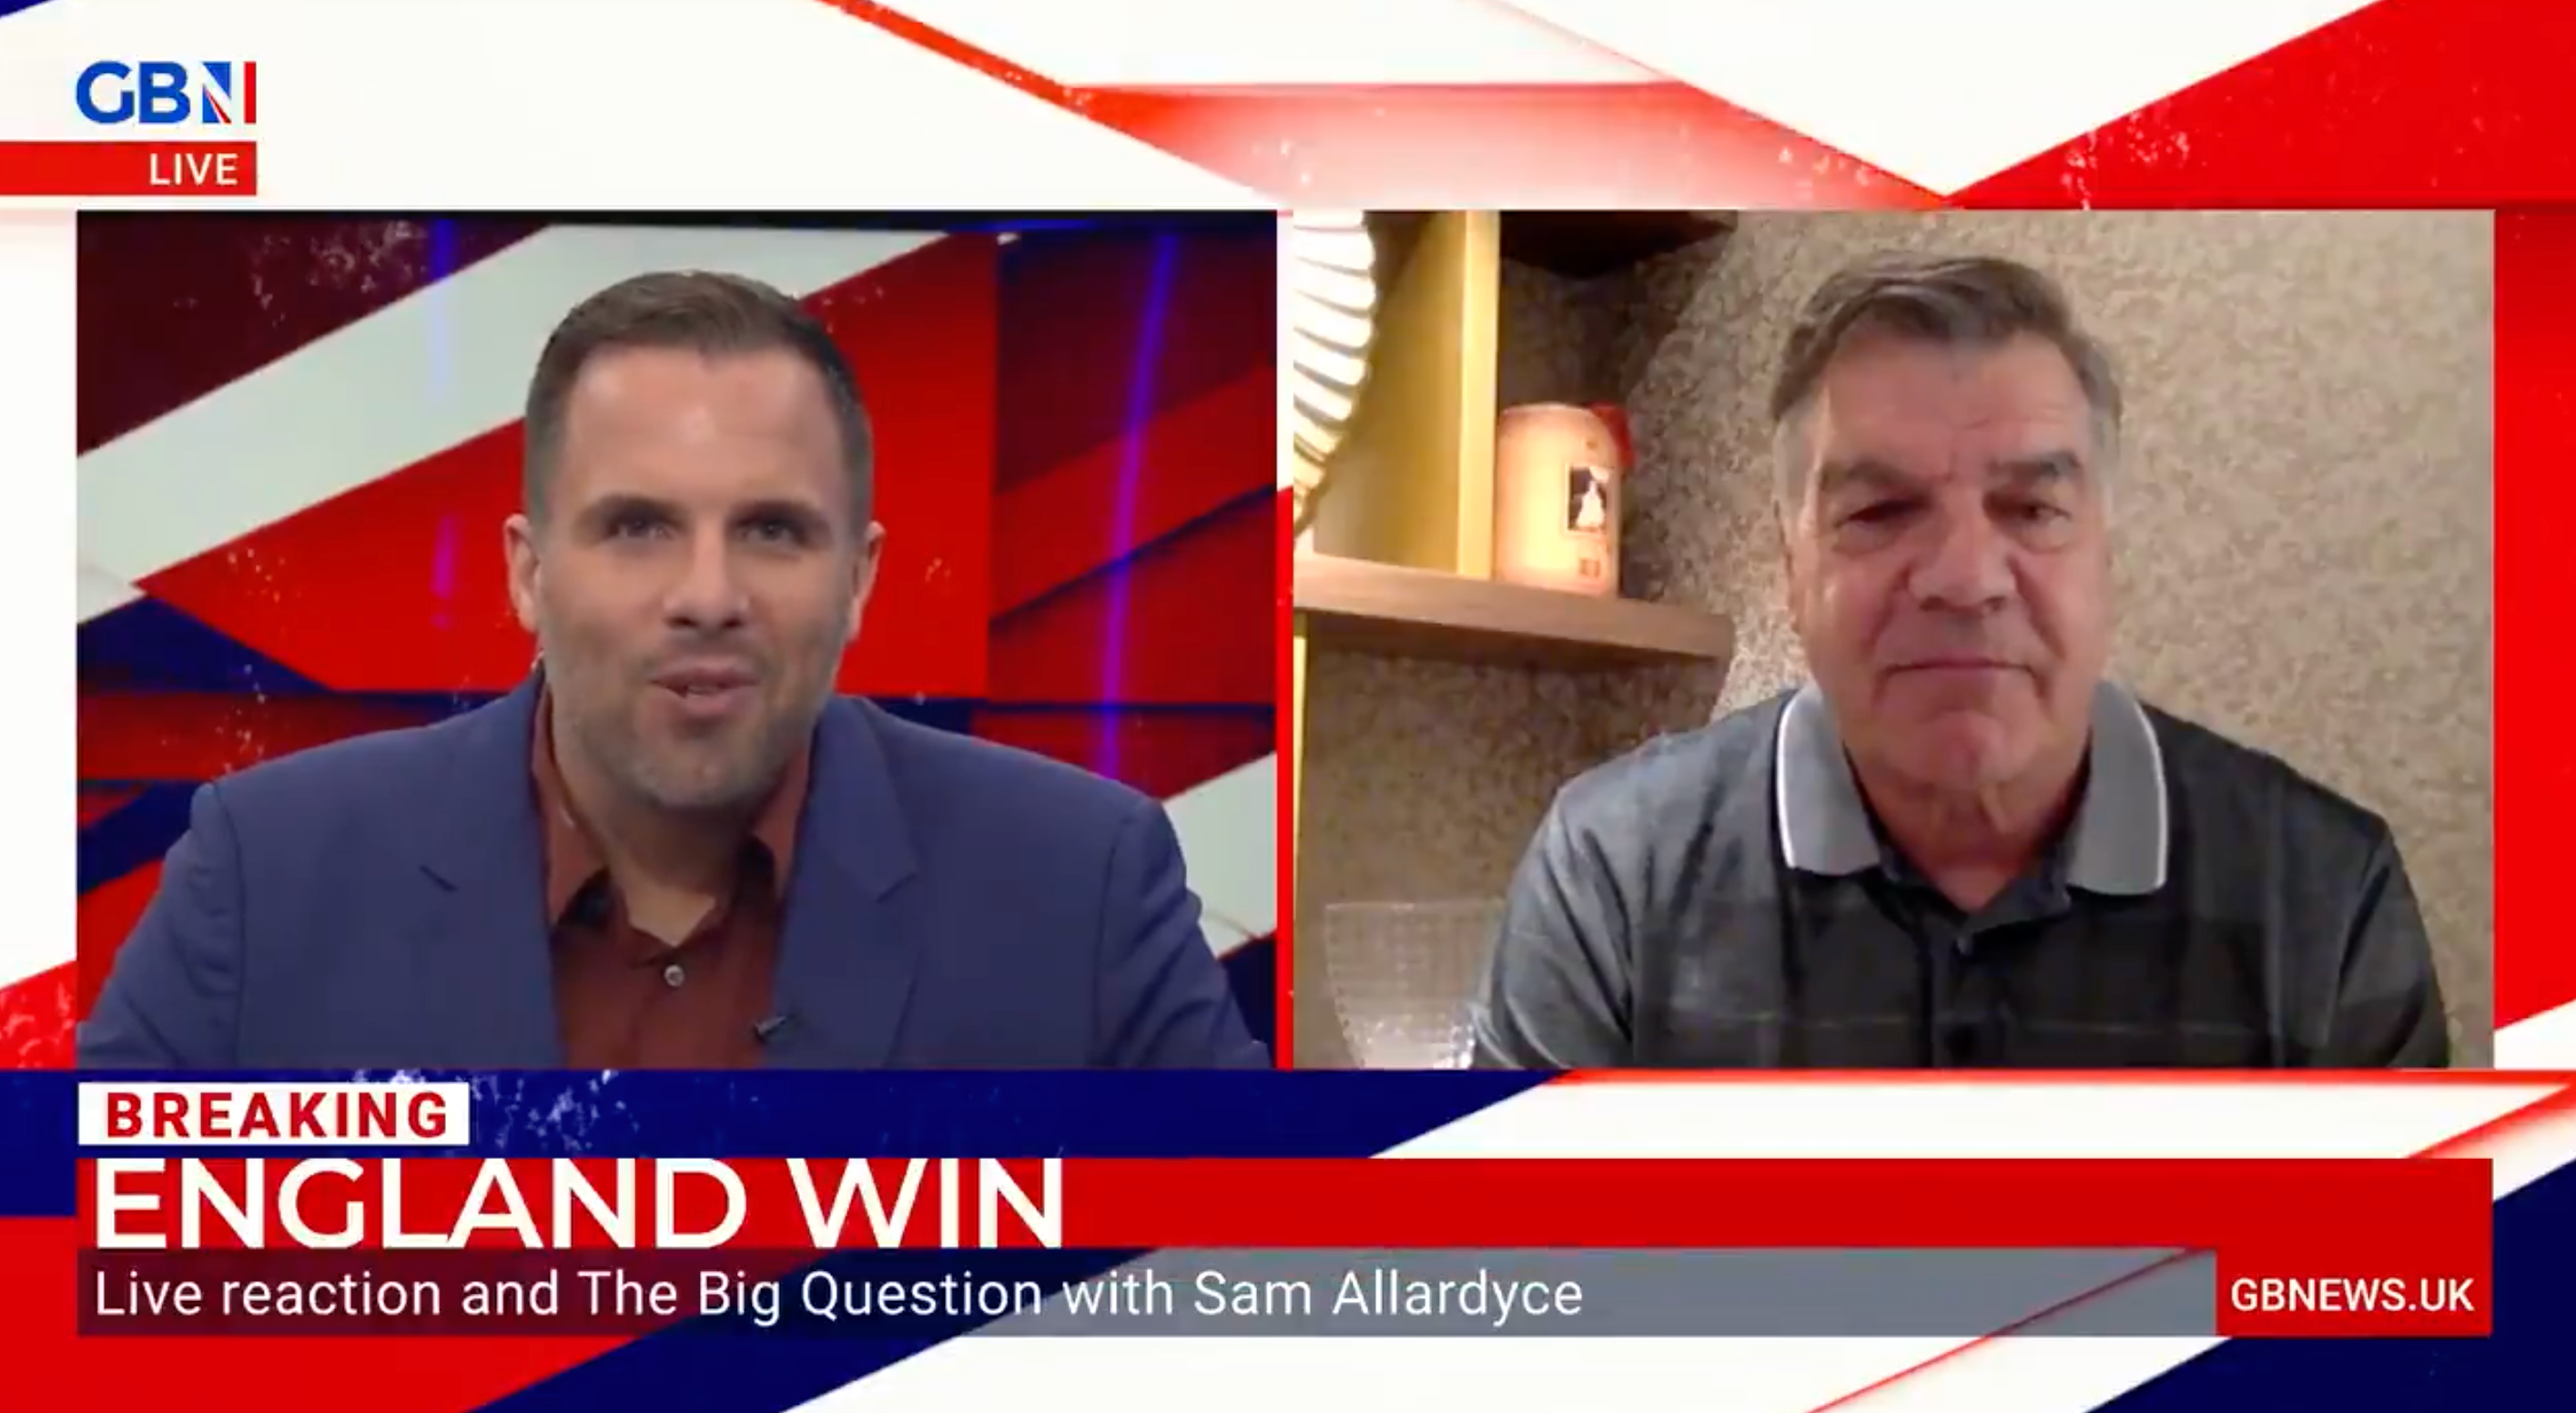 Sam Allardyce appeared on GB News after Wednesday’s game